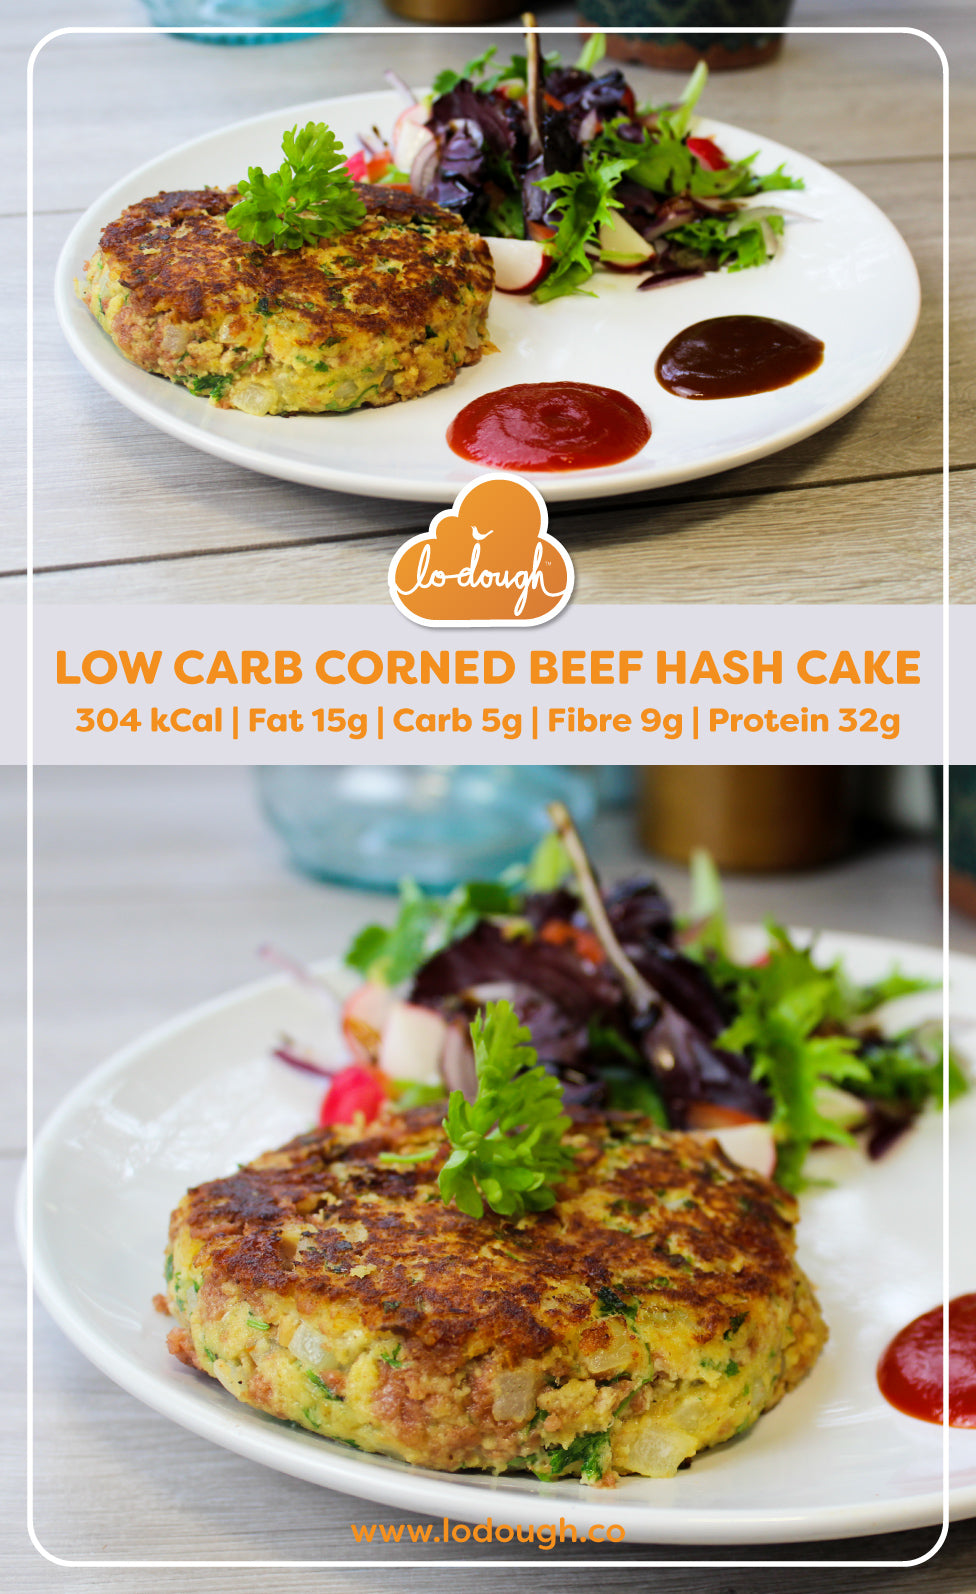 Low Carb Corned Beef Hash Cake